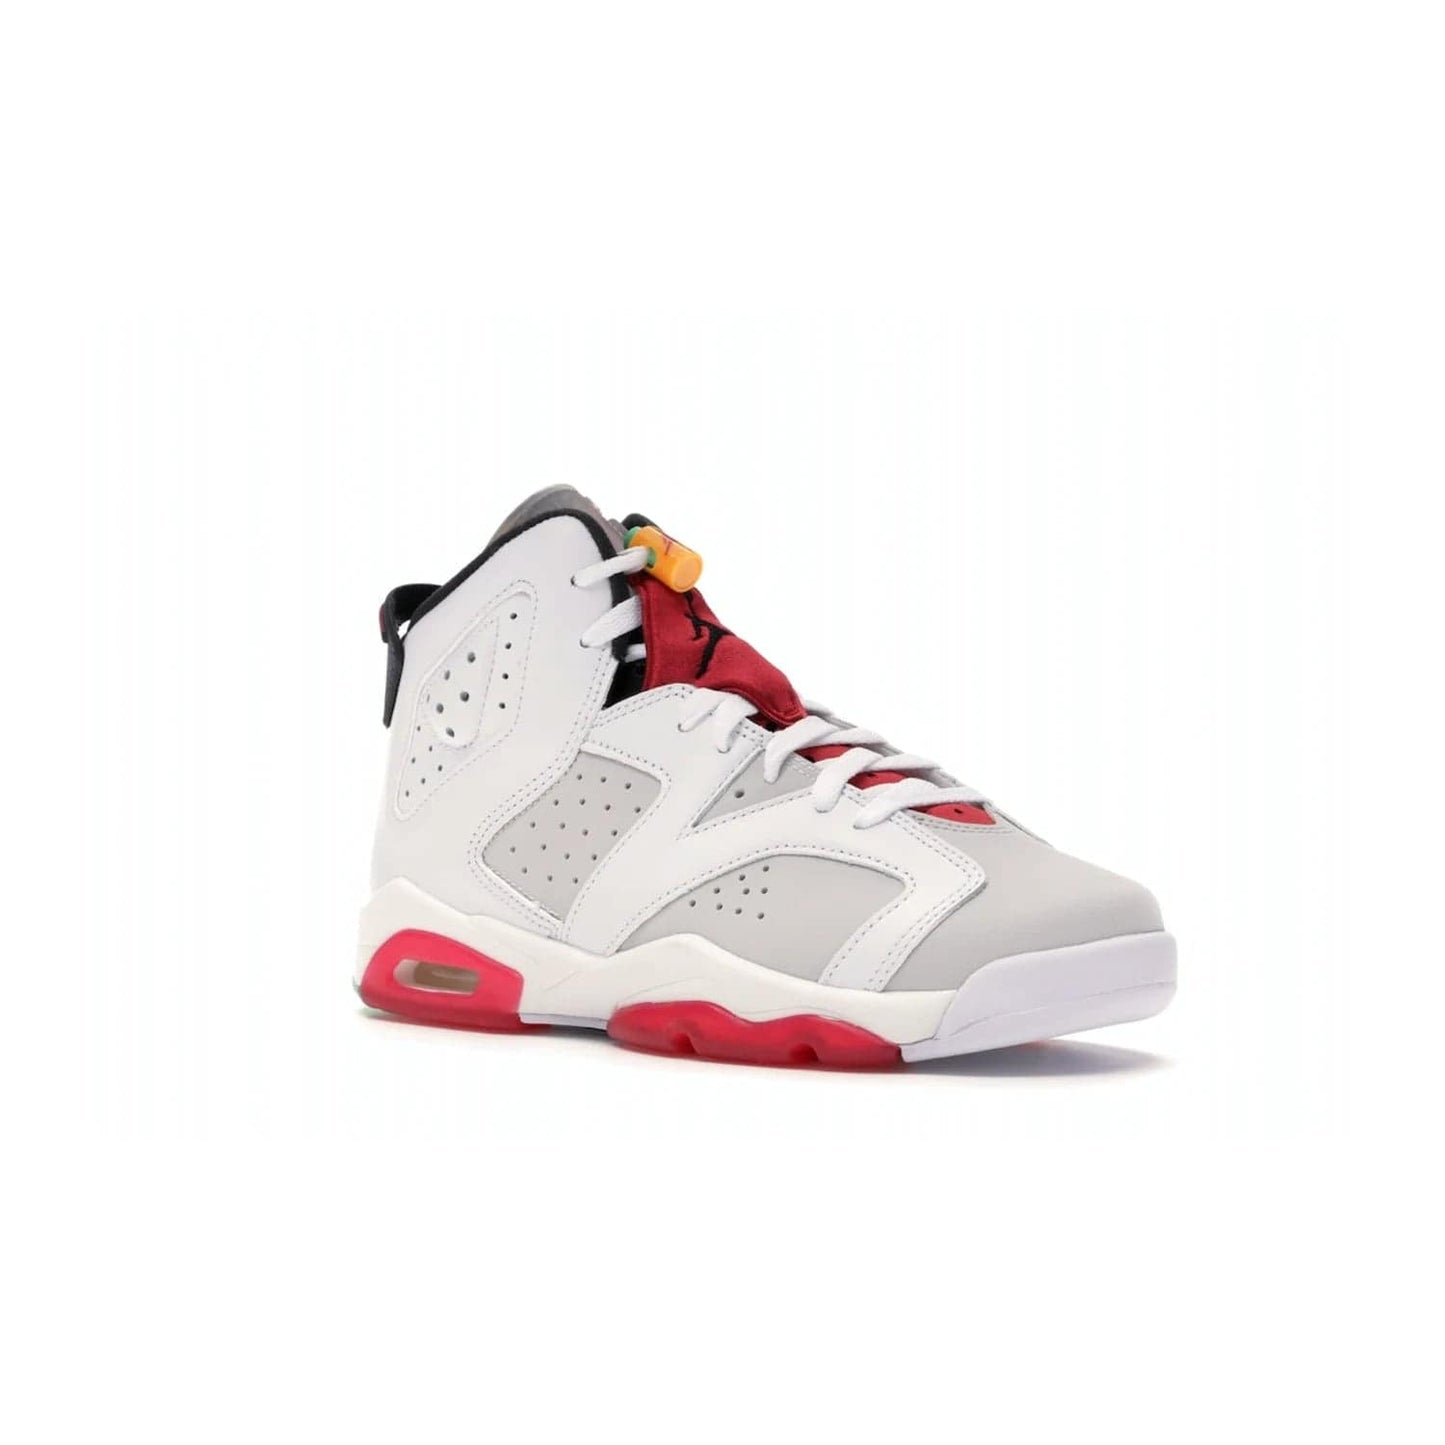 Jordan 6 Retro Hare (GS) - Image 5 - Only at www.BallersClubKickz.com - The Air Jordan 6 Hare GS. Comfortable suede upper, perforations, red pods, two-tone midsole, and signature "Jumpman" emblem. Released 17 June 2020. Perfect for any sneakerhead.